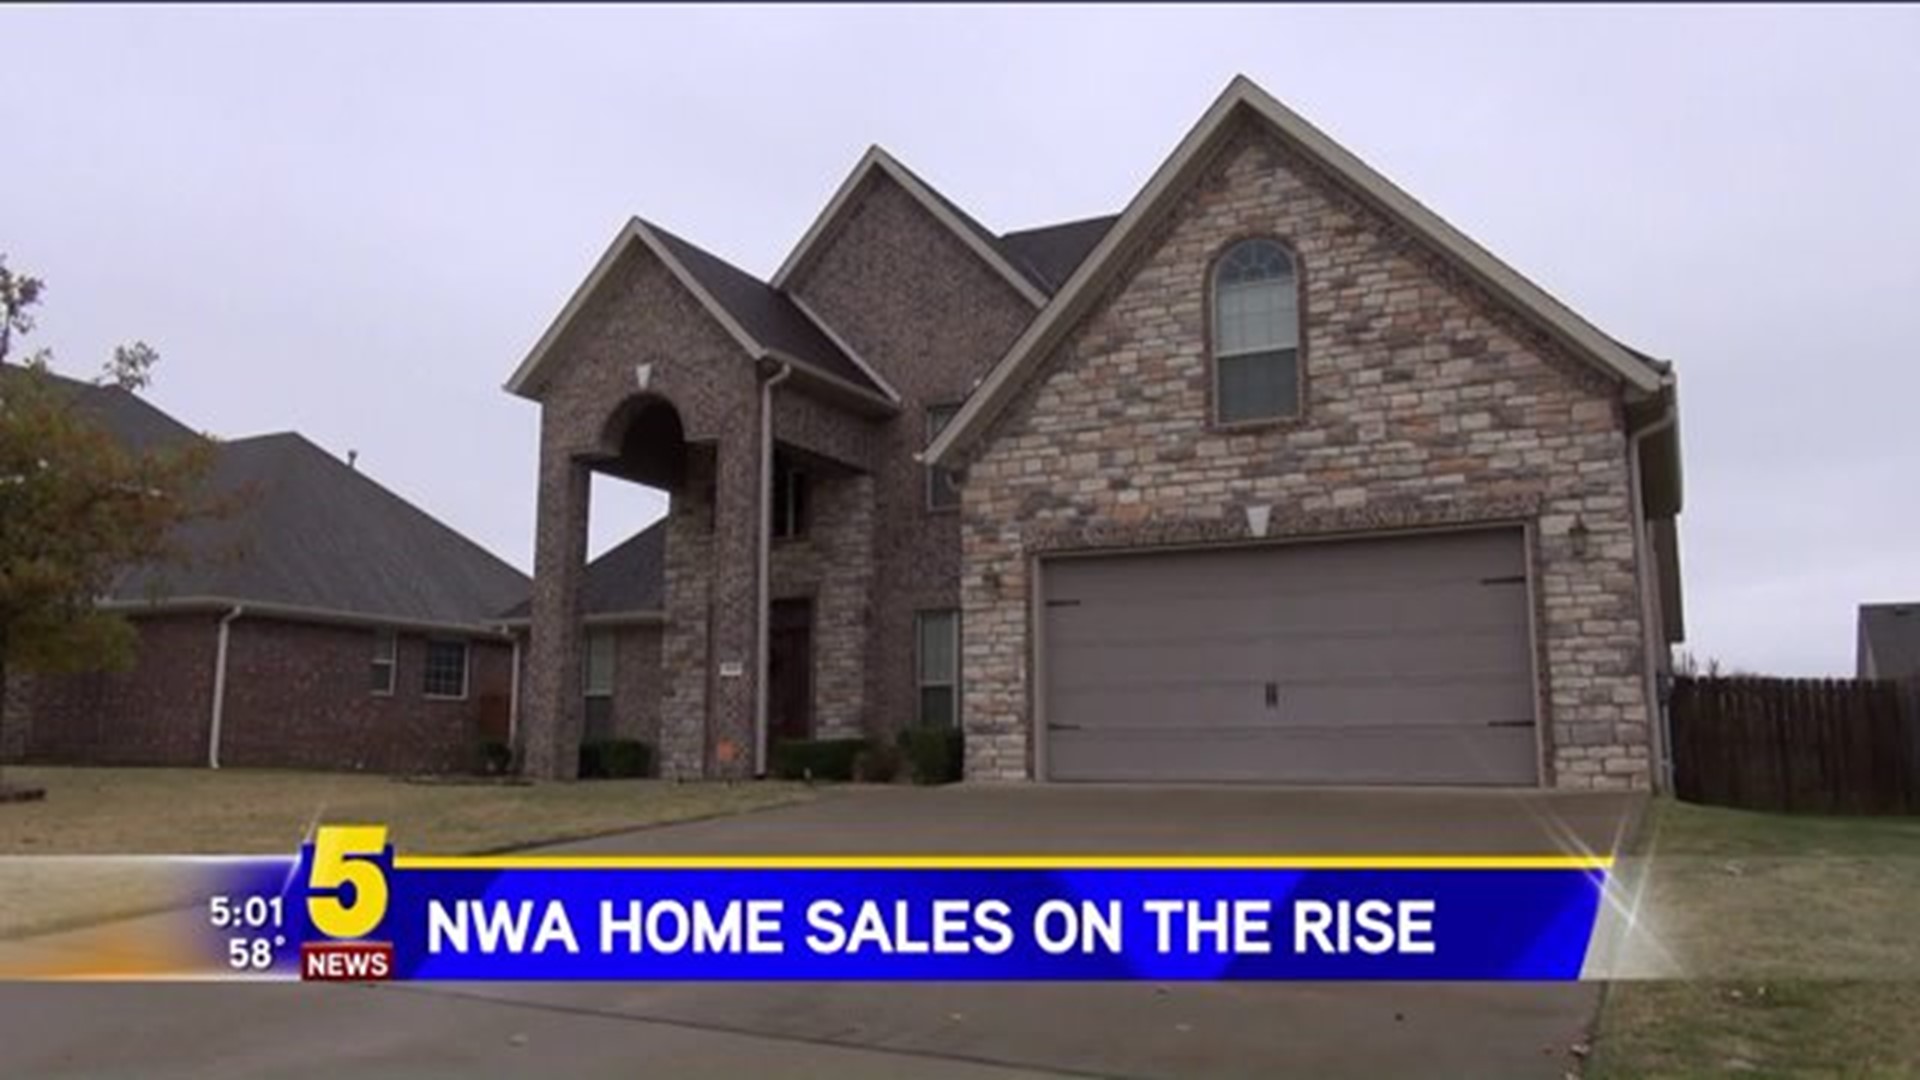 NWA HOME SALES ON THE RISE